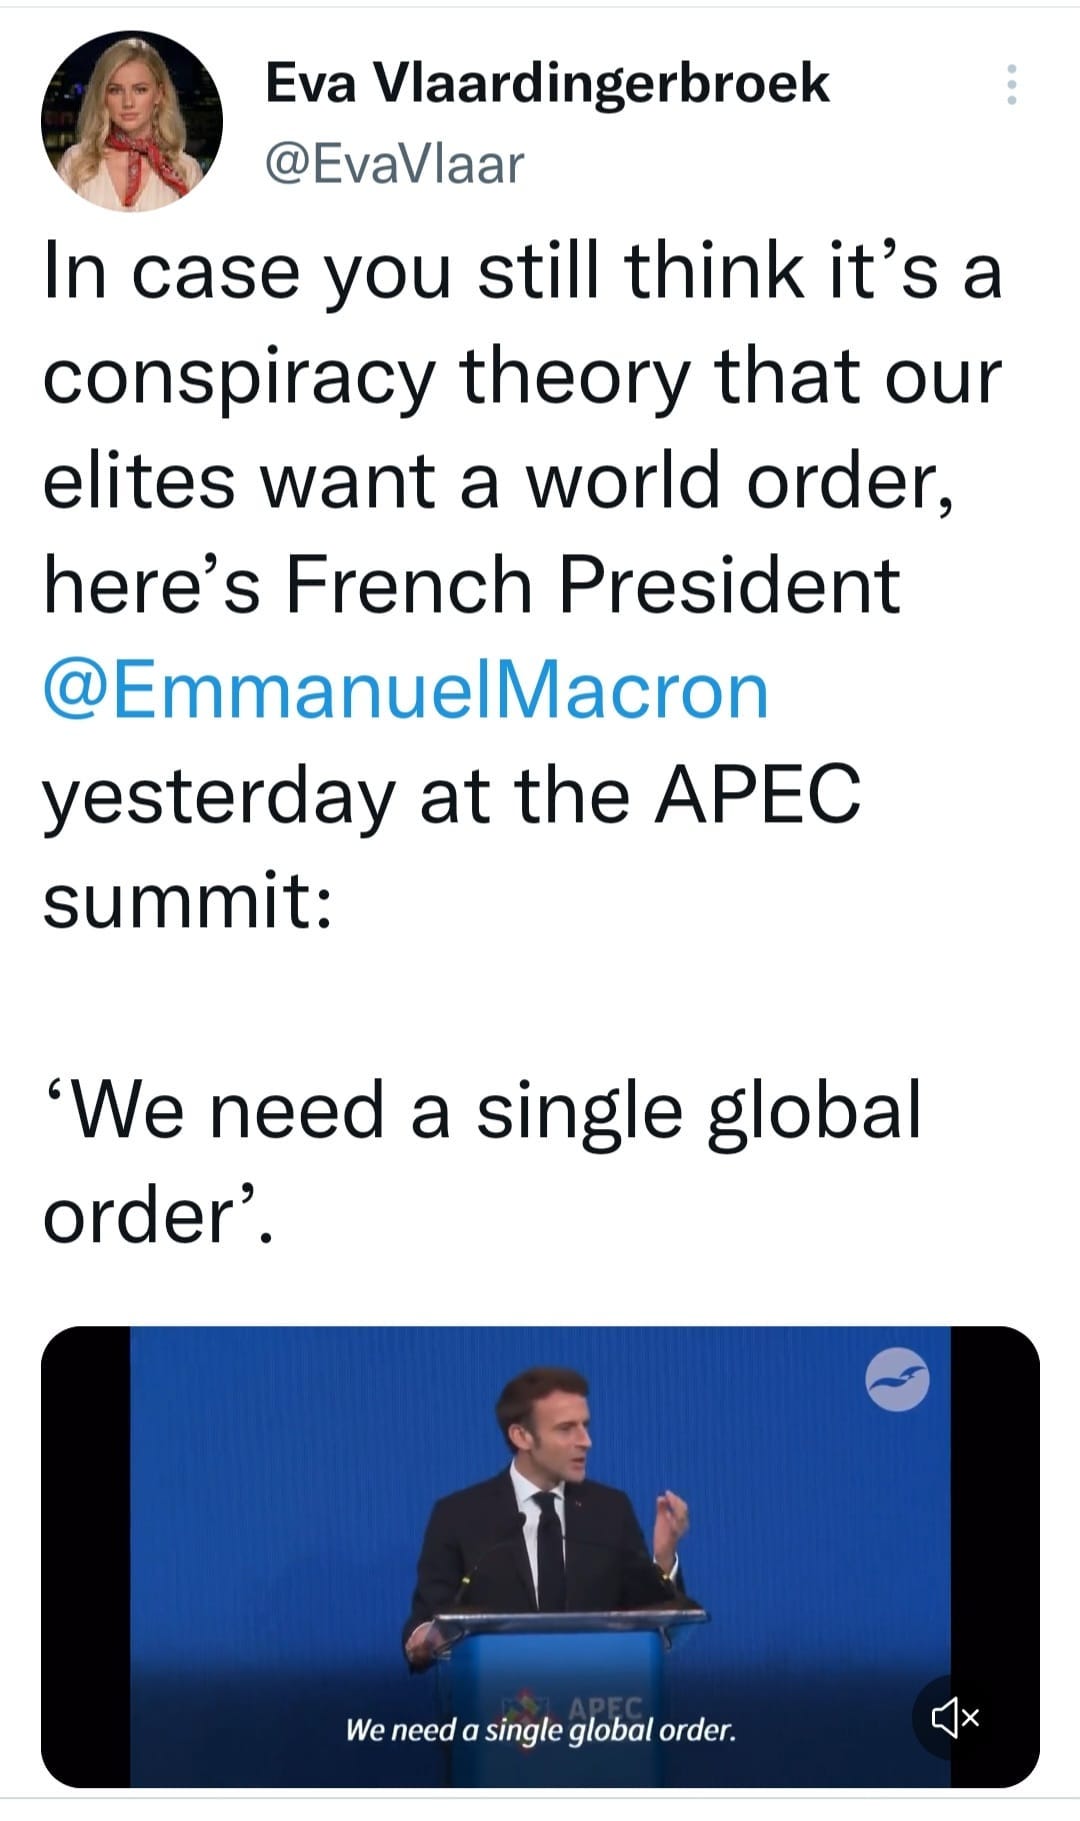 May be a Twitter screenshot of 2 people and text that says 'Eva Vlaardingerbroek @EvaVlaar In case you still think it's a conspiracy theory that our elites want a world order, here's French President @EmmanuelMacron yesterday at the APEC summit: 'We need a single global order'. We need a single global order.'